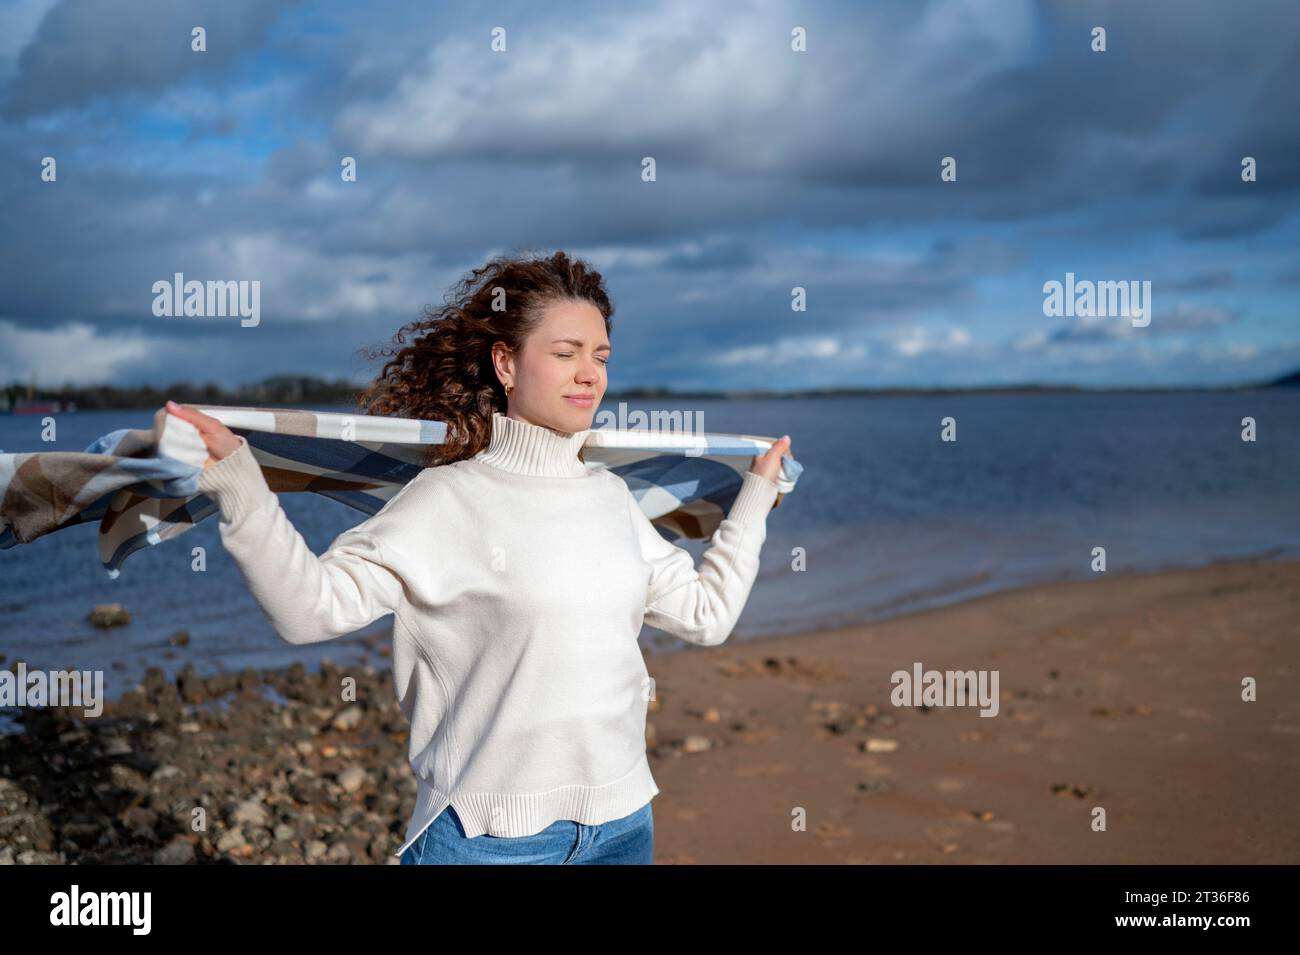 Smiling woman with eyes closed holding shawl at beach Stock Photo